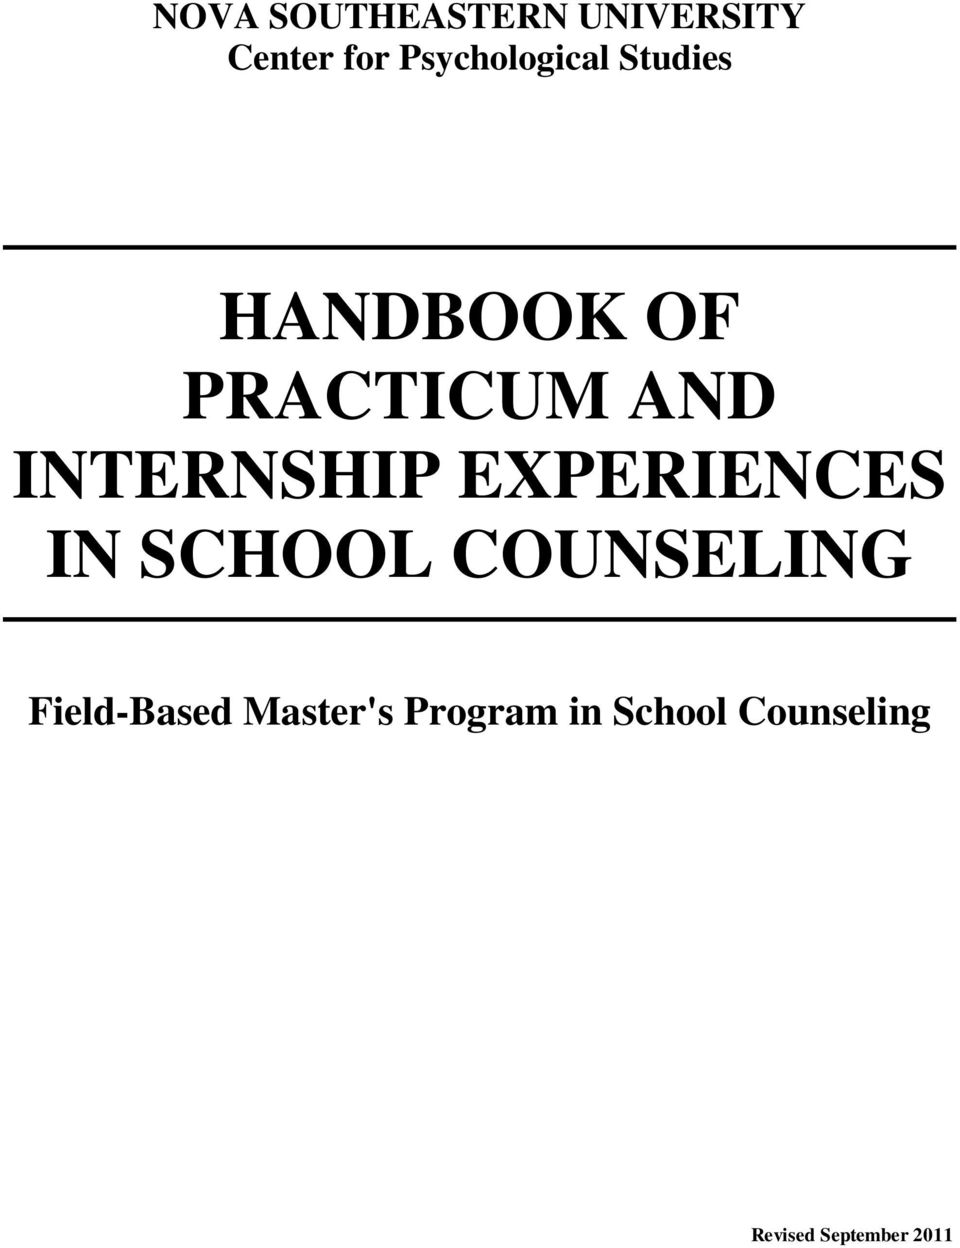 INTERNSHIP EXPERIENCES IN SCHOOL COUNSELING